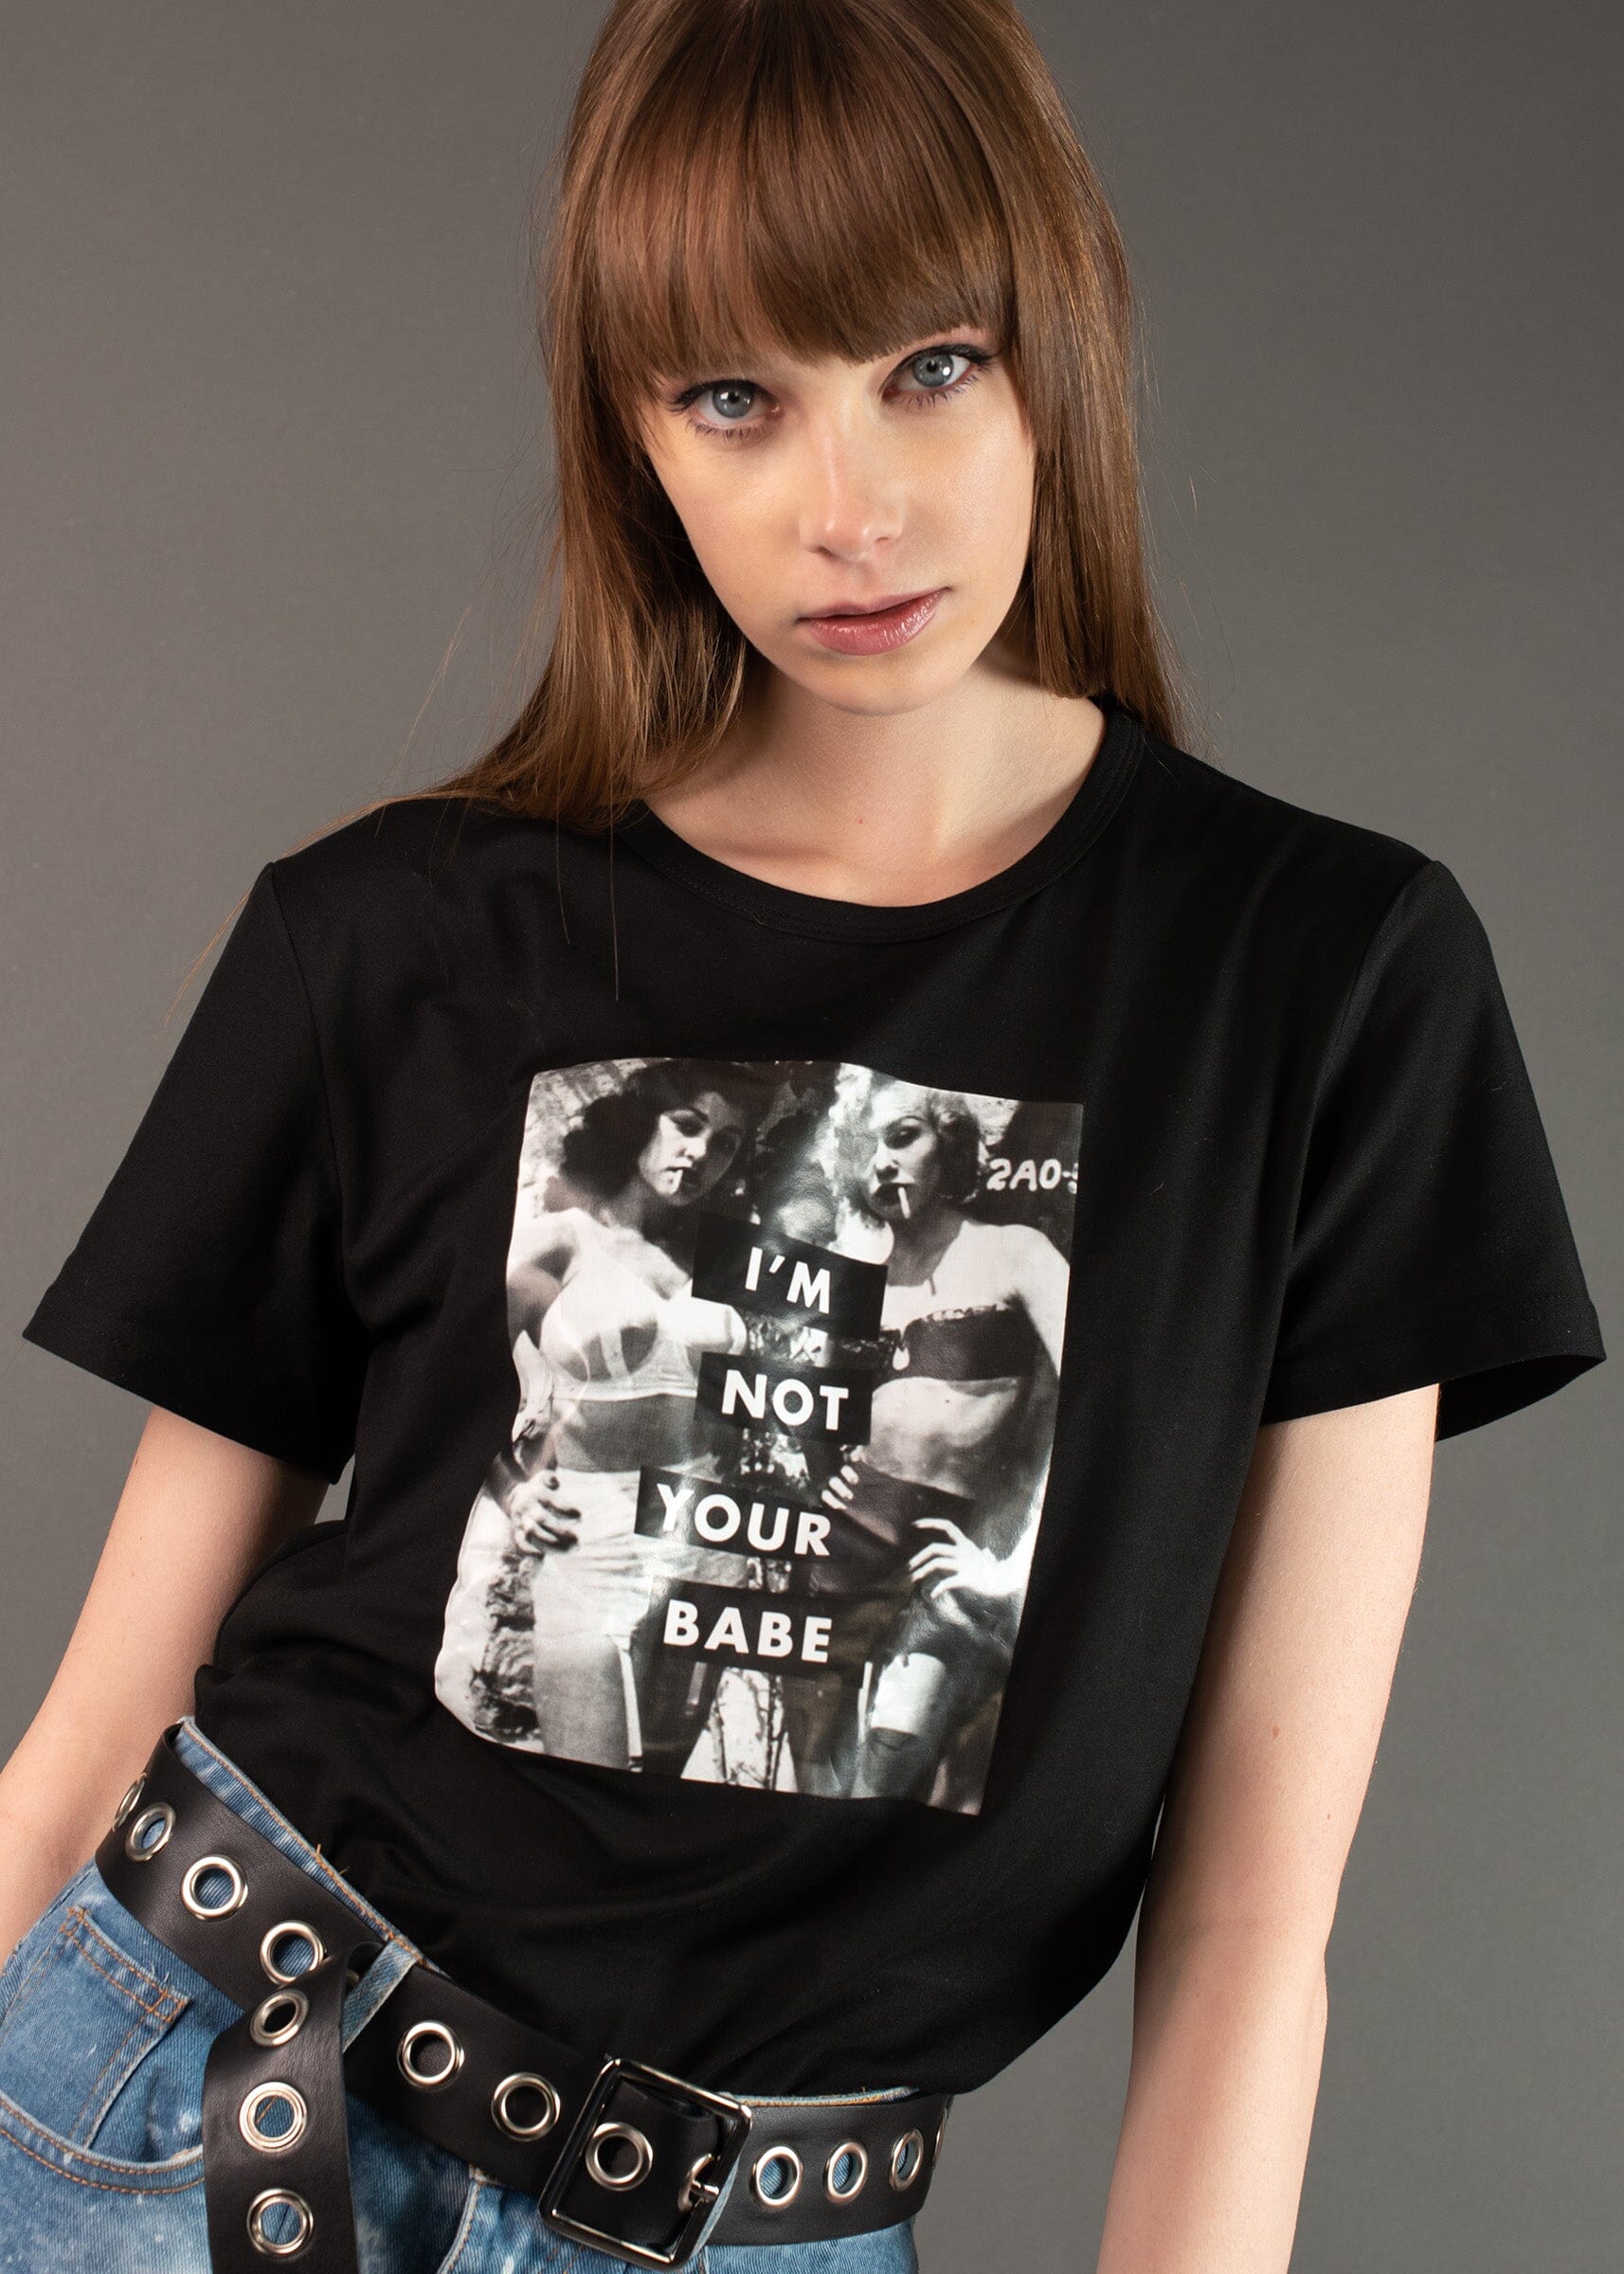 Not Your Babe Graphic Tee Tees Kate Hewko Black XS 